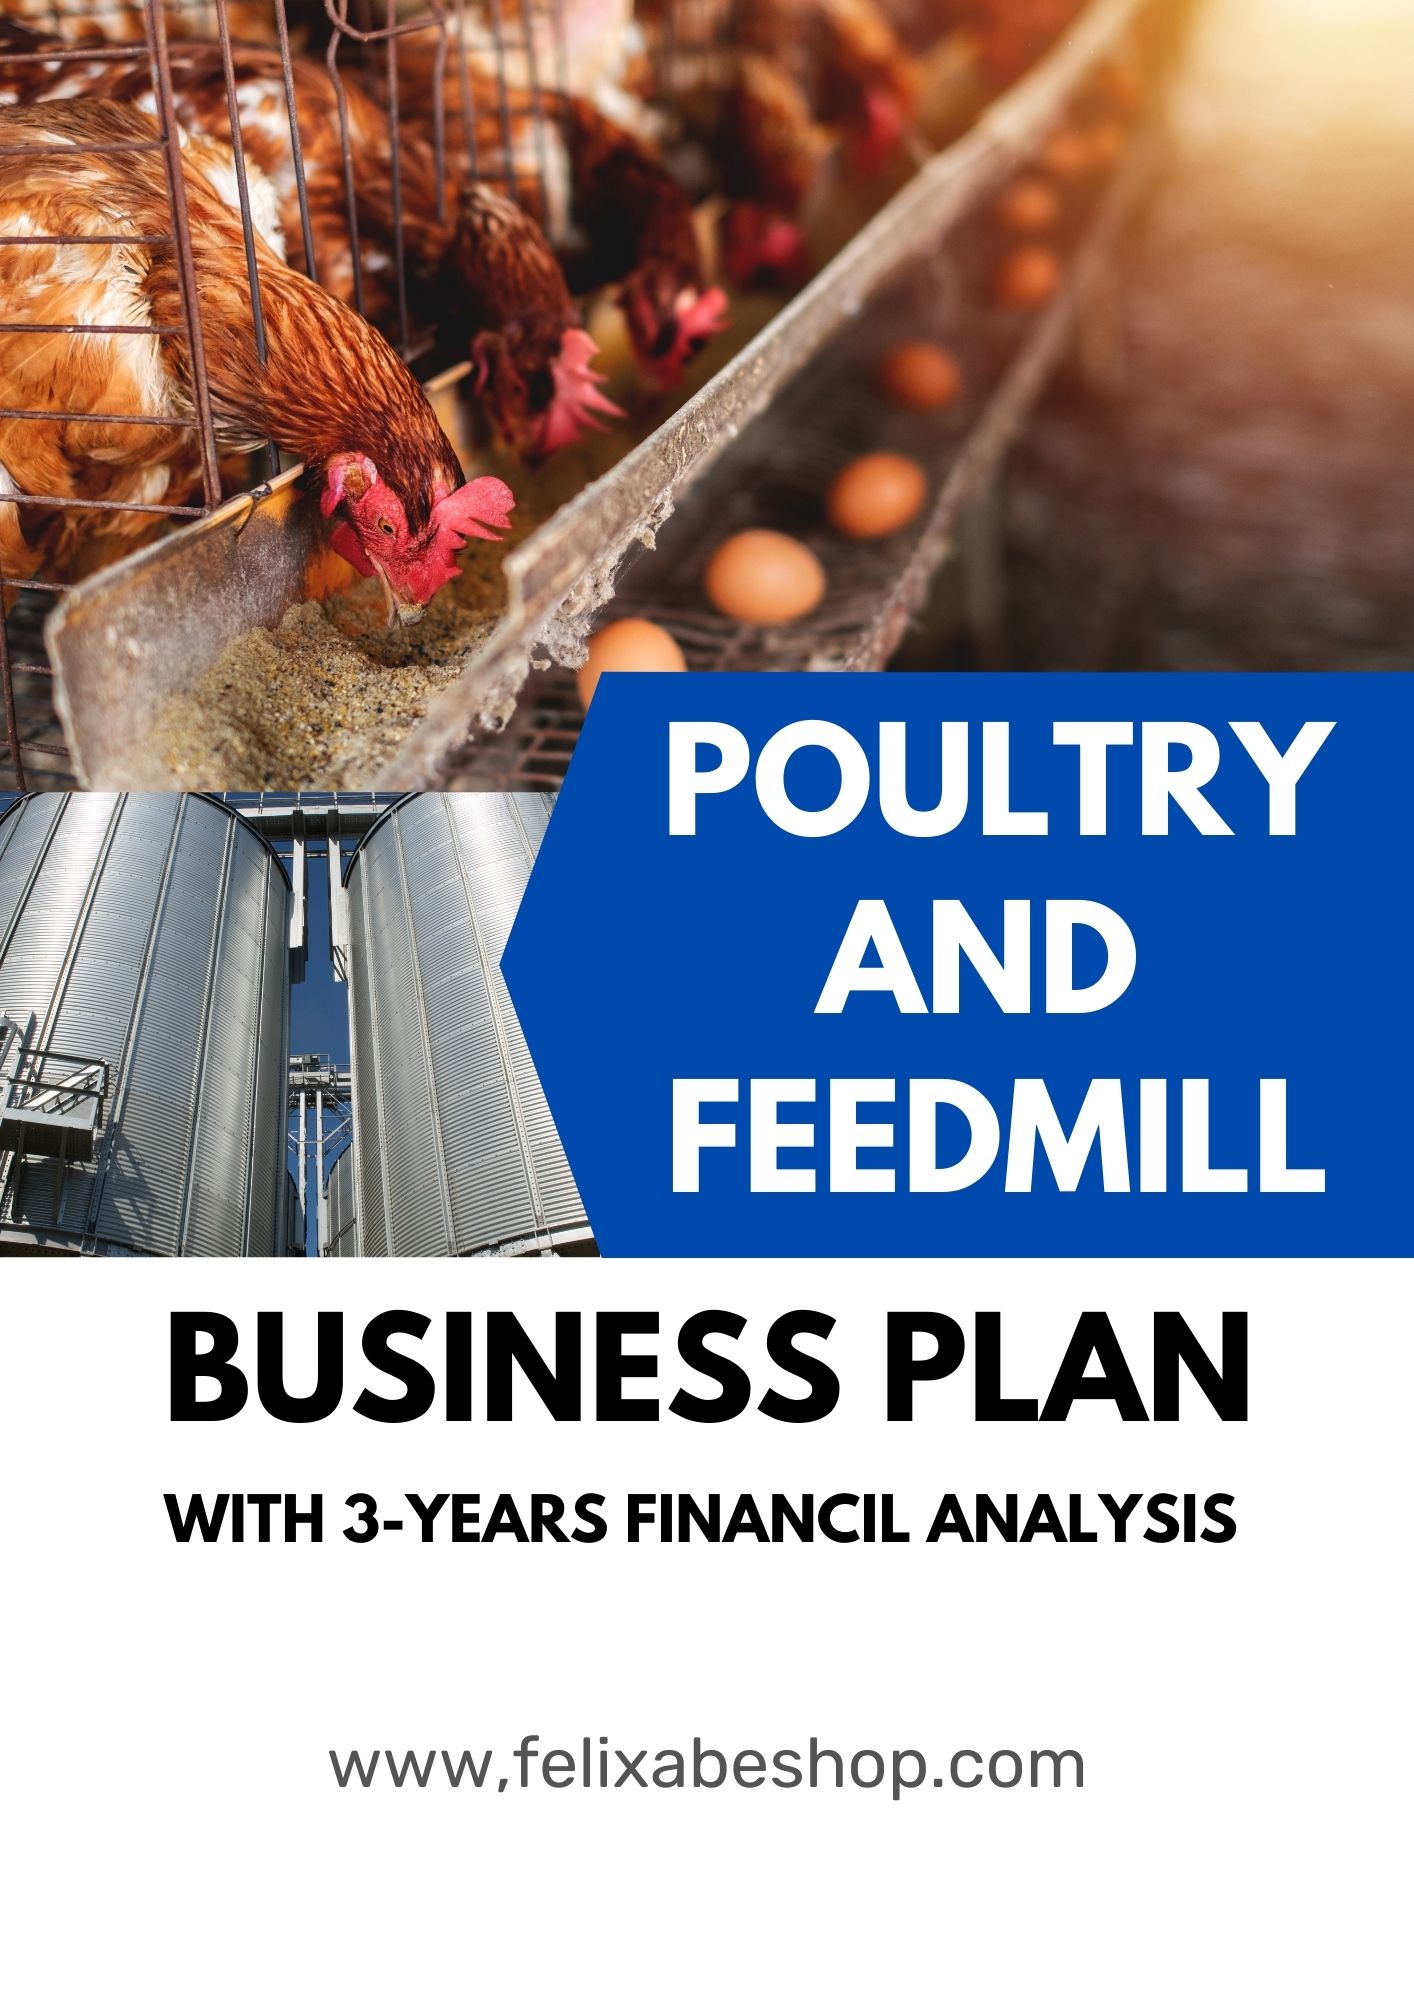 example of a poultry business plan